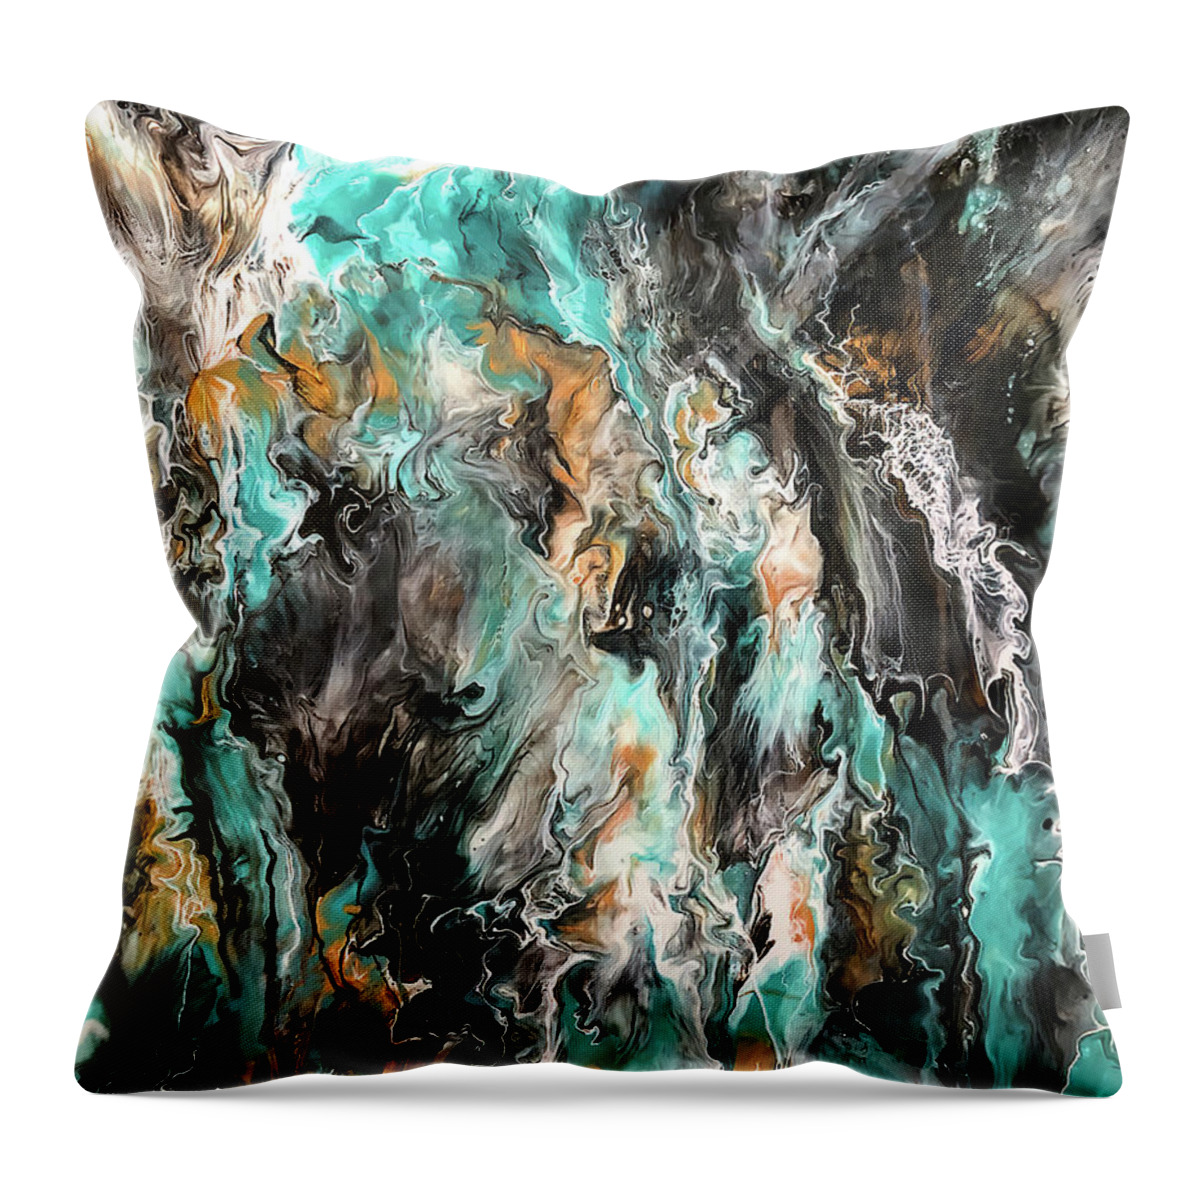 Acrylic Throw Pillow featuring the painting Tumultuous by Teresa Wilson by Teresa Wilson